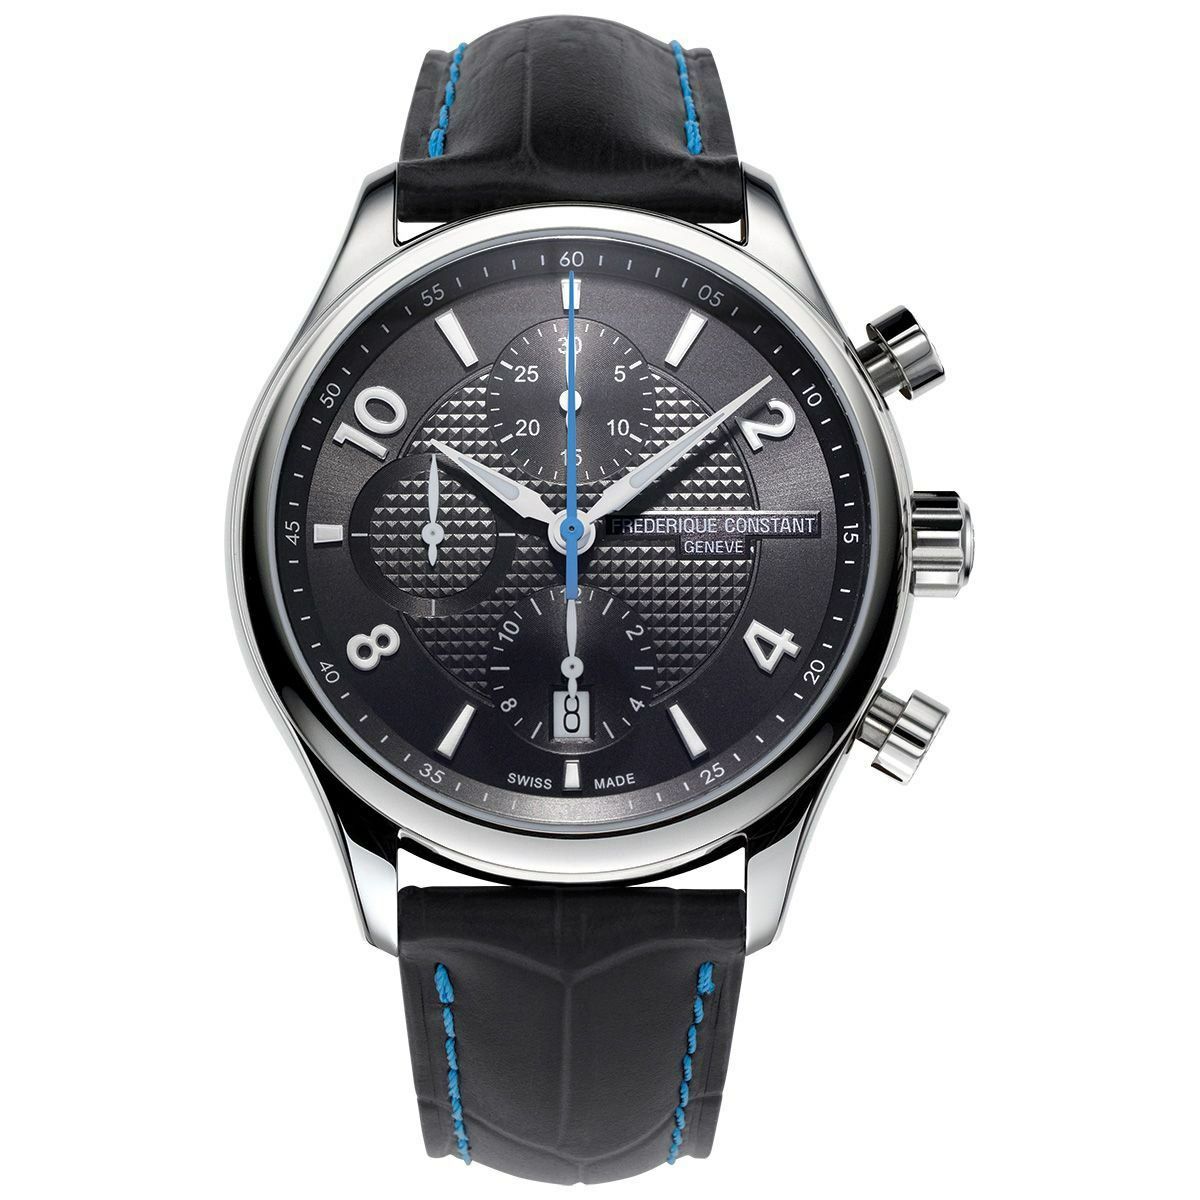 Frederique constant Runabout Chronograph Limited Edition